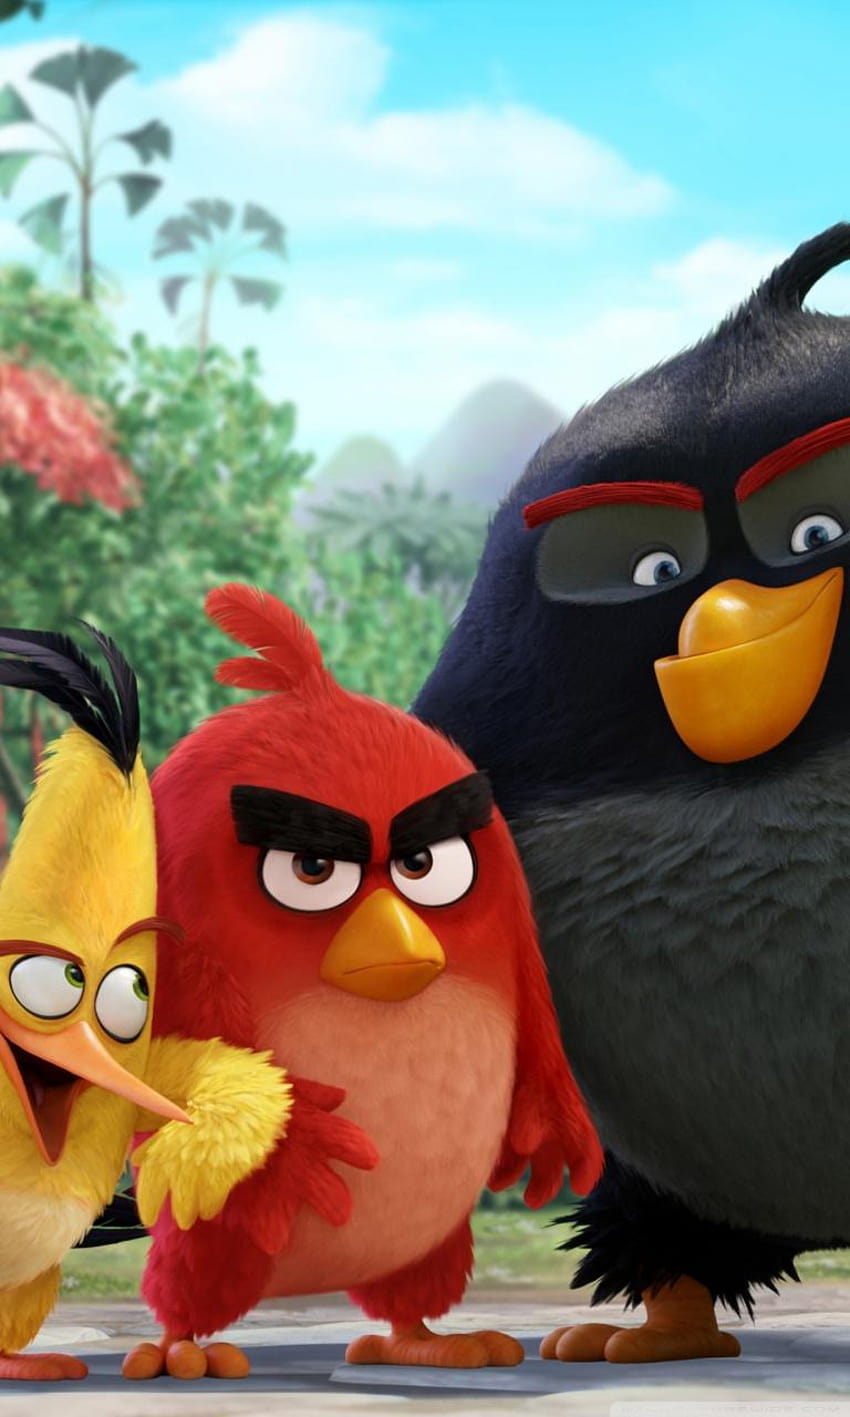 Angry Birds Movie 2016 ❤ for Ultra TV, angry birds movie 2 red HD phone wallpaper